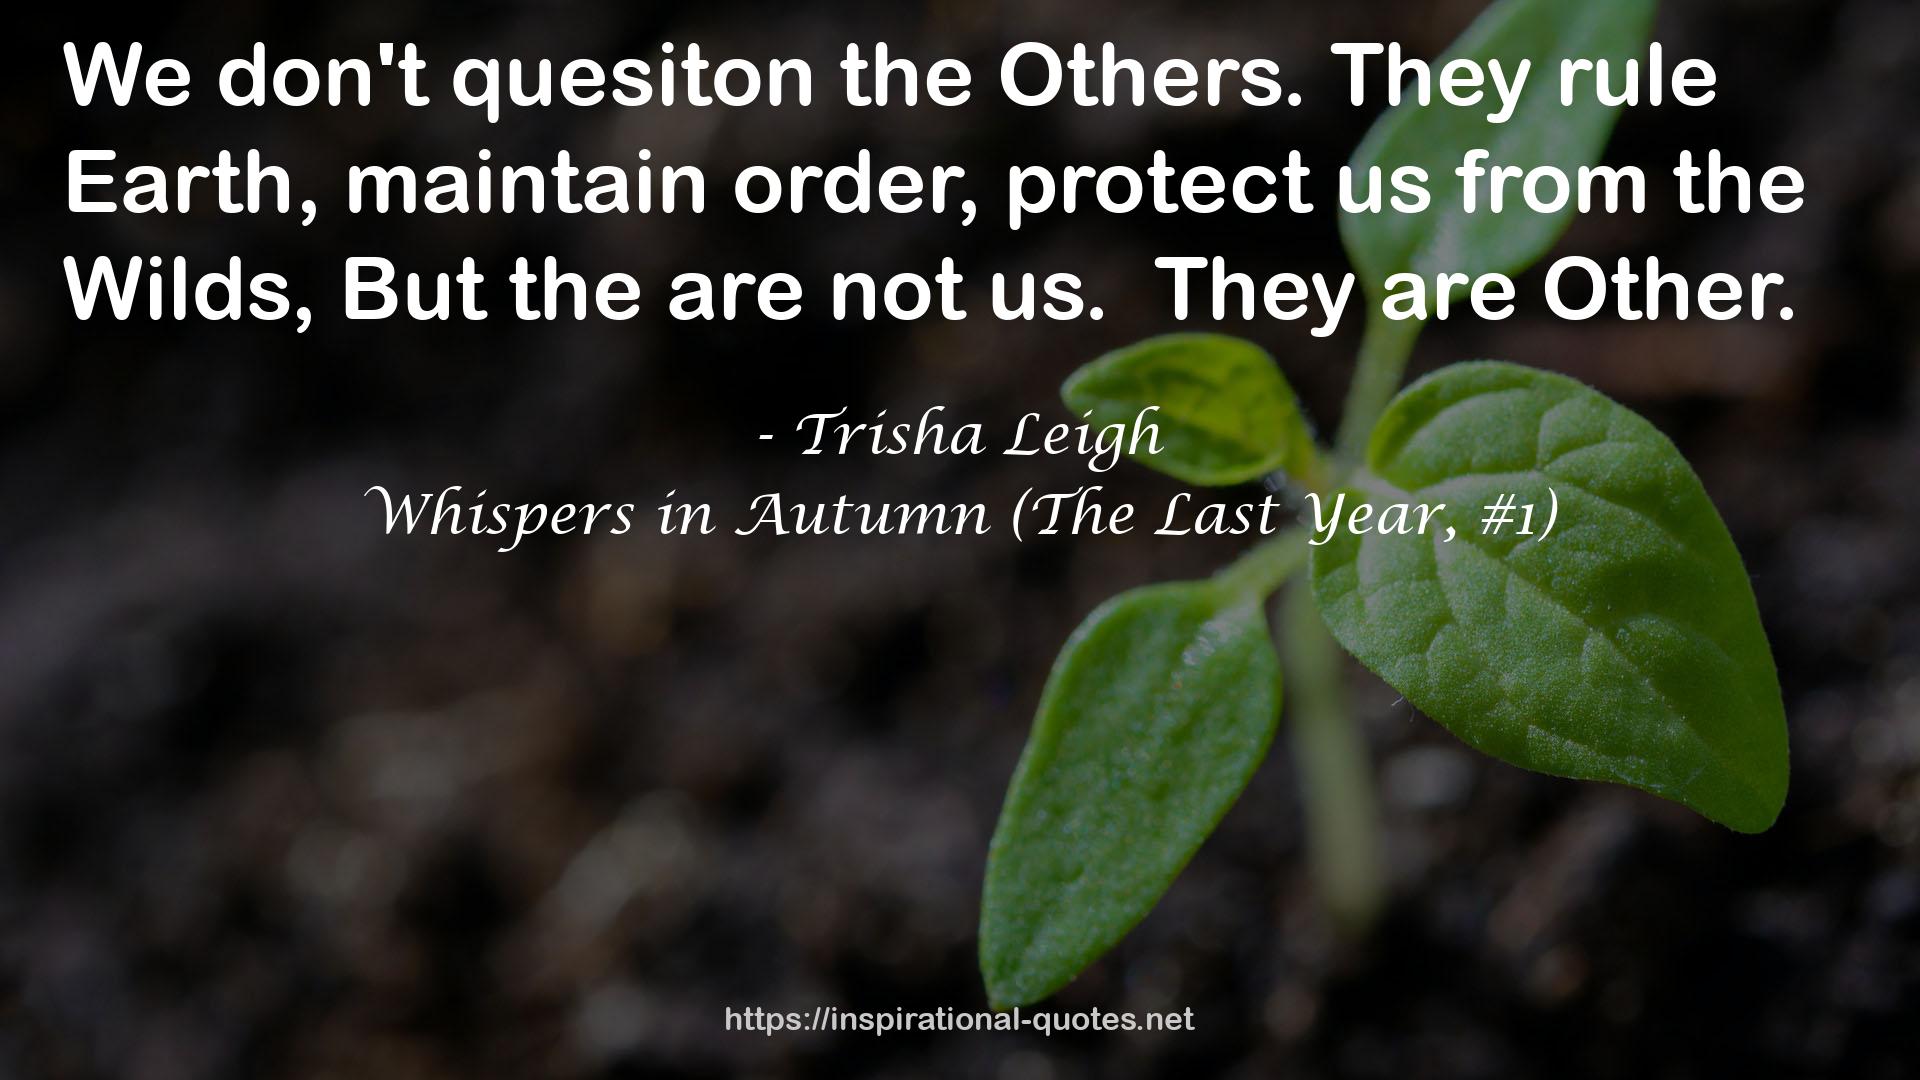 Whispers in Autumn (The Last Year, #1) QUOTES